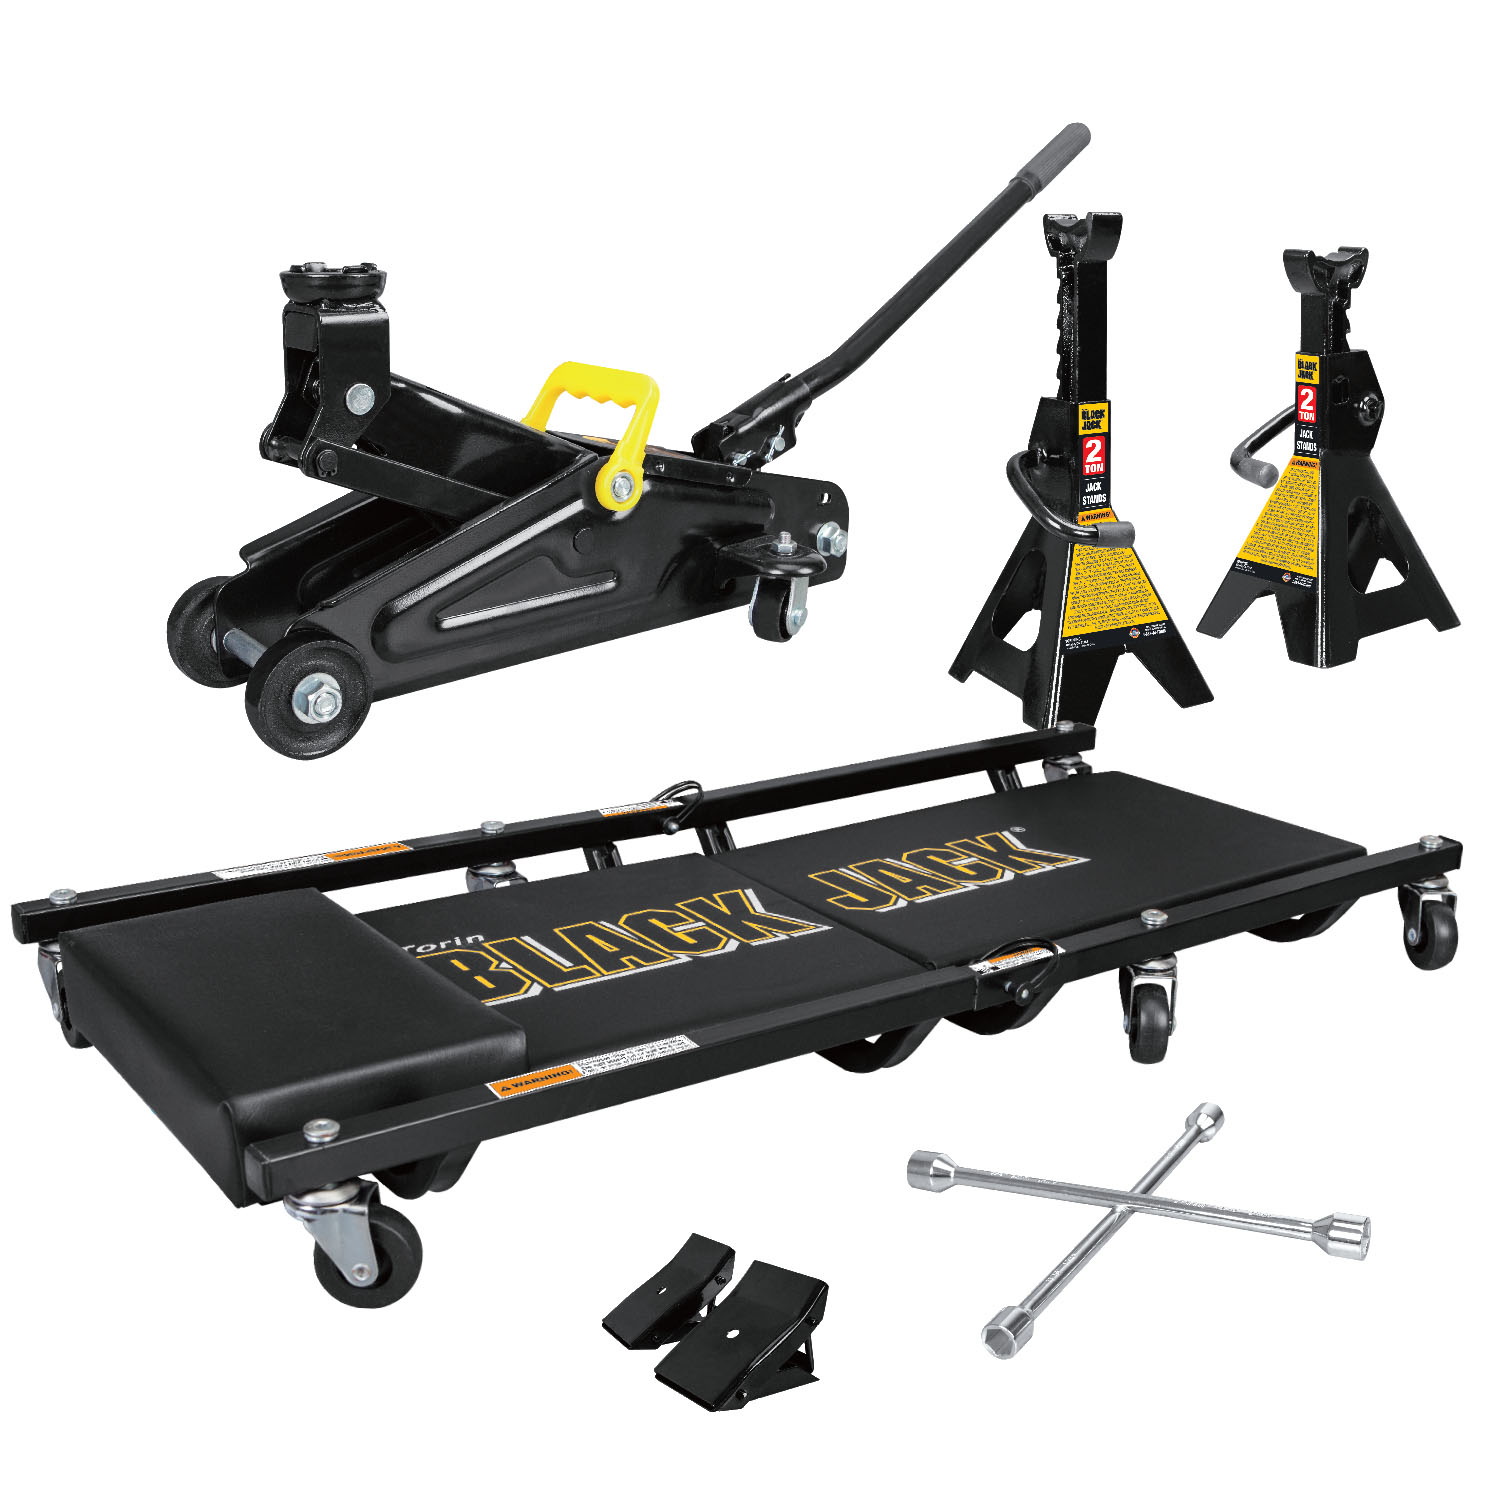 Torin Black Jack T82206W 2 Ton Vehicle Lift Combo Kit for Any Type:Trolley Jack&Creeper Seat&Jack Stands - image 1 of 8